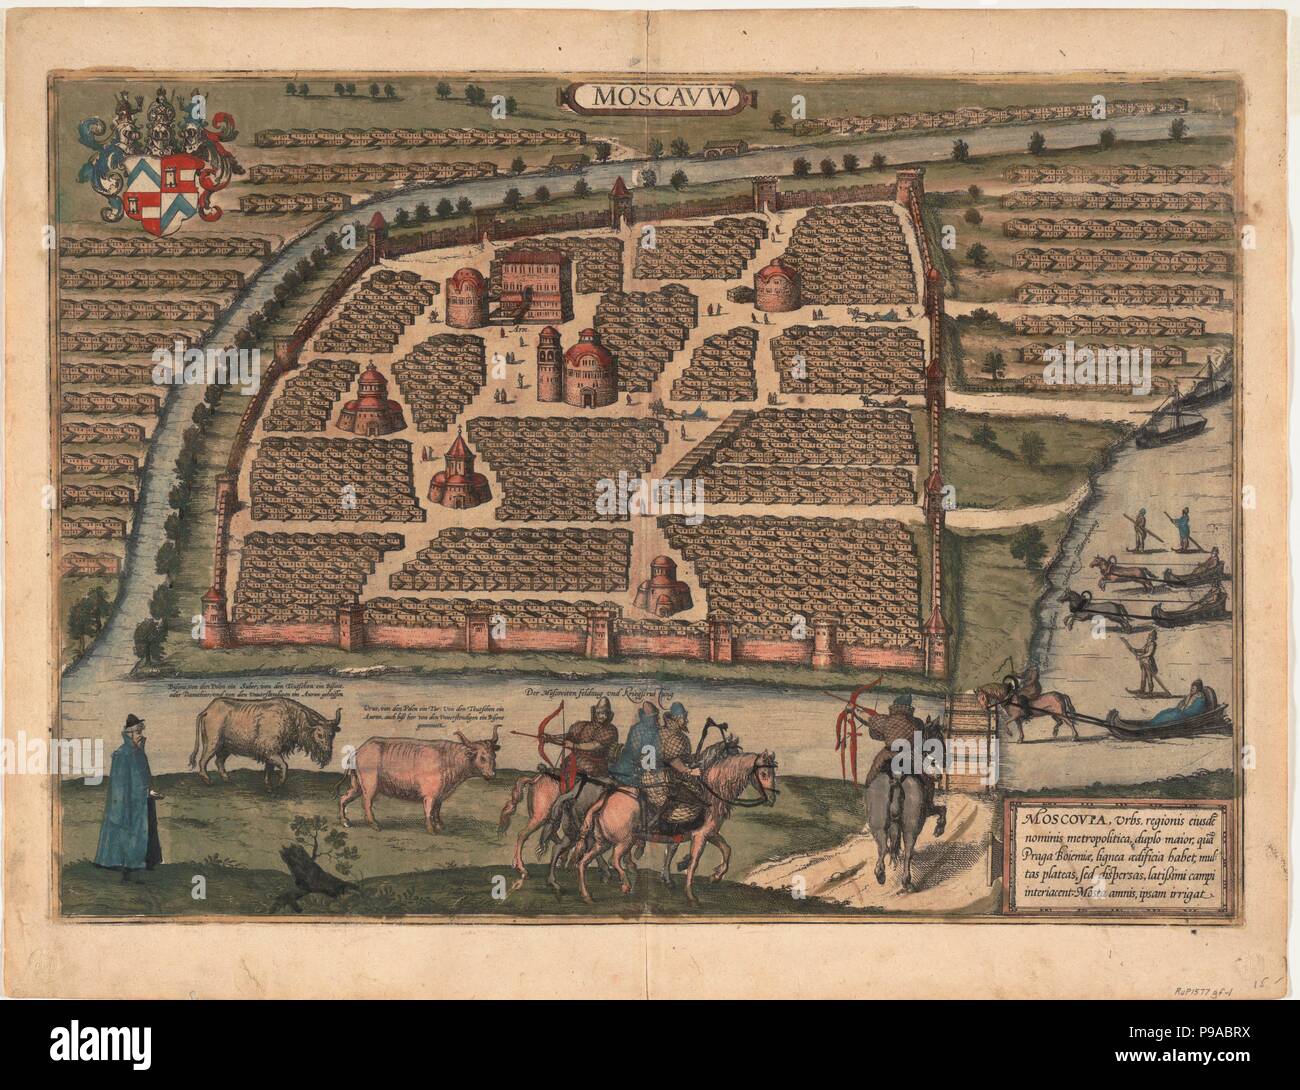 Map of Moscow of the 16th century (From: Civitates orbis terrarium). Museum: PRIVATE COLLECTION. Stock Photo